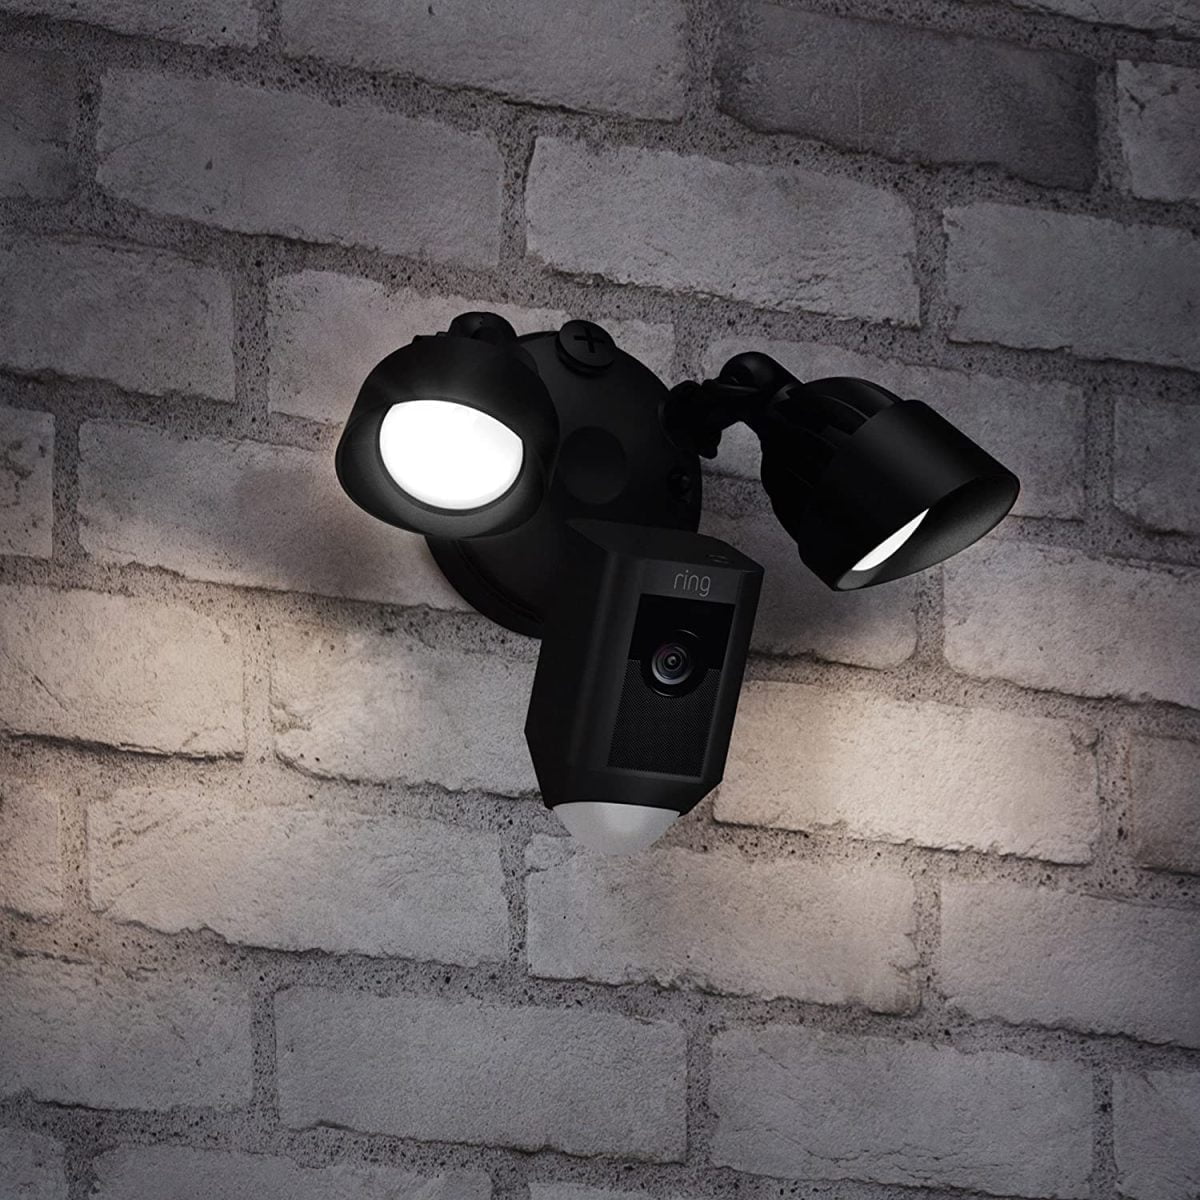 Ring &Lt;H1&Gt;Ring Floodlight Cam Wired Plus - Black&Lt;/H1&Gt; Https://Www.youtube.com/Watch?V=4U4M5X6Enr8 &Lt;Ul Class=&Quot;A-Unordered-List A-Vertical A-Spacing-Mini&Quot;&Gt; &Lt;Li&Gt;&Lt;Span Class=&Quot;A-List-Item&Quot;&Gt;1080P Hd Security Camera With Two-Way Talk, Motion-Activated Led Floodlights And Security Siren, Wifi Connectivity And Customisable Motion Zones To Focus On What Matters Most.&Lt;/Span&Gt;&Lt;/Li&Gt; &Lt;Li&Gt;&Lt;Span Class=&Quot;A-List-Item&Quot;&Gt;With 1080P Hd Video And Two-Way Talk You Can See And Speak To Visitors Night And Day, Home Or Away.&Lt;/Span&Gt;&Lt;/Li&Gt; &Lt;Li&Gt;&Lt;Span Class=&Quot;A-List-Item&Quot;&Gt;2000 Lumen Motion-Activated Led Floodlights With Brightness Control And A Security Siren For Protection When You Need It Most.&Lt;/Span&Gt;&Lt;/Li&Gt; &Lt;Li&Gt;&Lt;Span Class=&Quot;A-List-Item&Quot;&Gt;Customisable Motion Zones Allow You To Fine-Tune Your Motion Detection To The Areas You Want To Focus On.&Lt;/Span&Gt;&Lt;/Li&Gt; &Lt;Li&Gt;&Lt;Span Class=&Quot;A-List-Item&Quot;&Gt;Hardwire To Existing Wiring For Non-Stop Protection And Peace Of Mind.&Lt;/Span&Gt;&Lt;/Li&Gt; &Lt;Li&Gt;&Lt;Span Class=&Quot;A-List-Item&Quot;&Gt;Pair With A Ring Chime To Hear Audio Notifications In Your Home, And Add Voice Commands With A Compatible Alexa-Enabled Device.&Lt;/Span&Gt;&Lt;/Li&Gt; &Lt;Li&Gt;&Lt;Span Class=&Quot;A-List-Item&Quot;&Gt;Standard Features Such As Real-Time Notifications, Live View And Two-Way Talk Are Available Out Of The Box And At No Additional Cost On All Compatible Ring Devices. Add A Ring Protect Plan (Subscription Sold Separately) To Record, Review And Share The Moment You Missed (30-Day Free Trial Included In Your Purchase).&Lt;/Span&Gt;&Lt;/Li&Gt; &Lt;/Ul&Gt; &Lt;Strong&Gt;&Lt;Span Class=&Quot;A-List-Item&Quot;&Gt;One Year Warranty&Lt;/Span&Gt;&Lt;/Strong&Gt; &Lt;Strong&Gt;&Lt;Span Class=&Quot;A-List-Item&Quot;&Gt; &Lt;B&Gt;We Also Provide International Wholesale And Retail Shipping To All Gcc Countries: Saudi Arabia, Qatar, Oman, Kuwait, Bahrain.&Lt;/B&Gt;&Lt;/Span&Gt;&Lt;/Strong&Gt; Ring Floodlight Cam Wired Plus Ring Floodlight Cam Wired Plus - Black